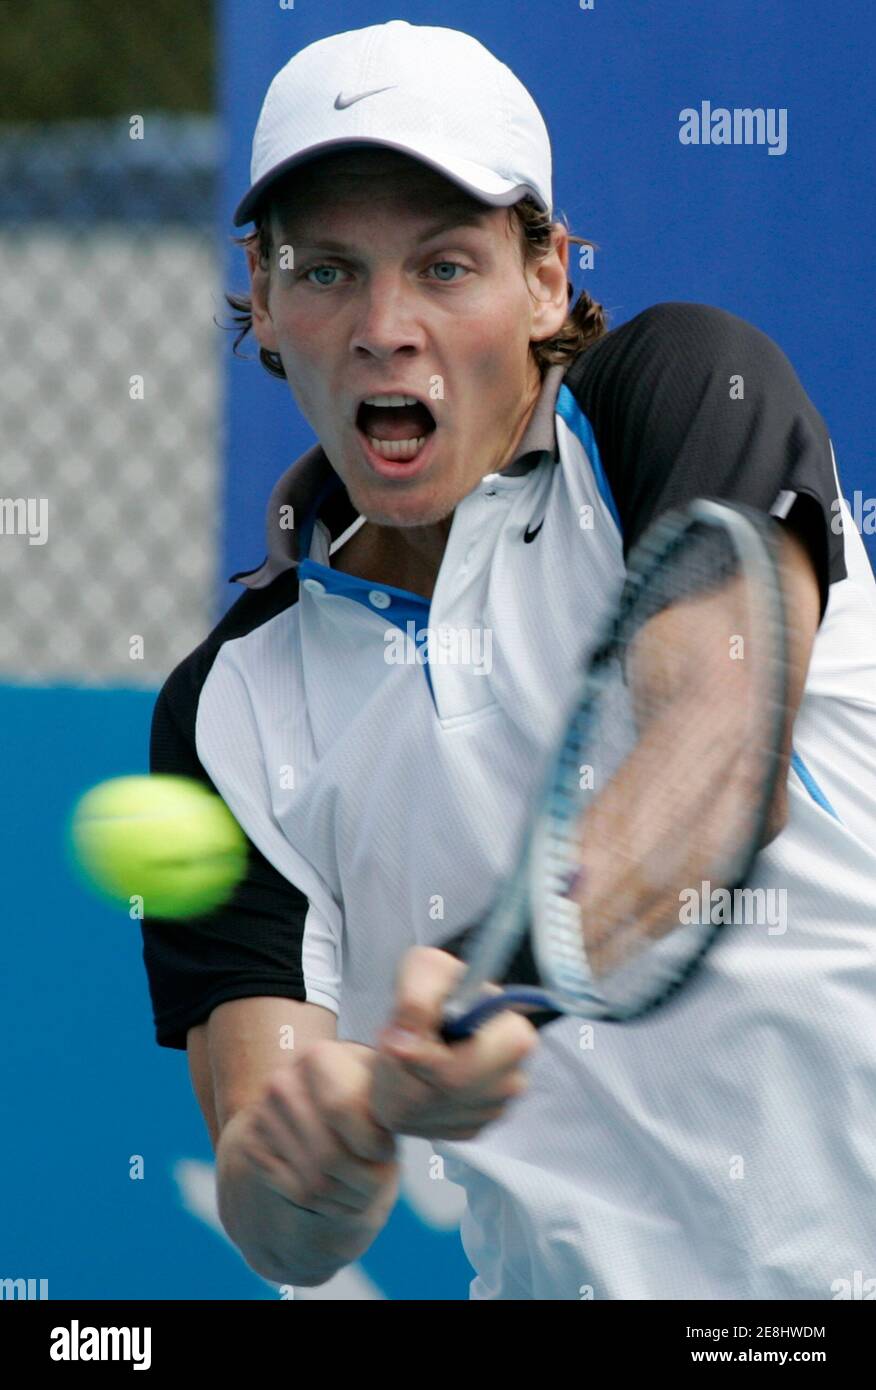 Tomas Berdych of Czech Republic hits a shot against Filippo Volandri of Italy during their match at the Sydney International tennis tournament January 7, 2008. REUTERS/Will Burgess     (AUSTRALIA) Stock Photo